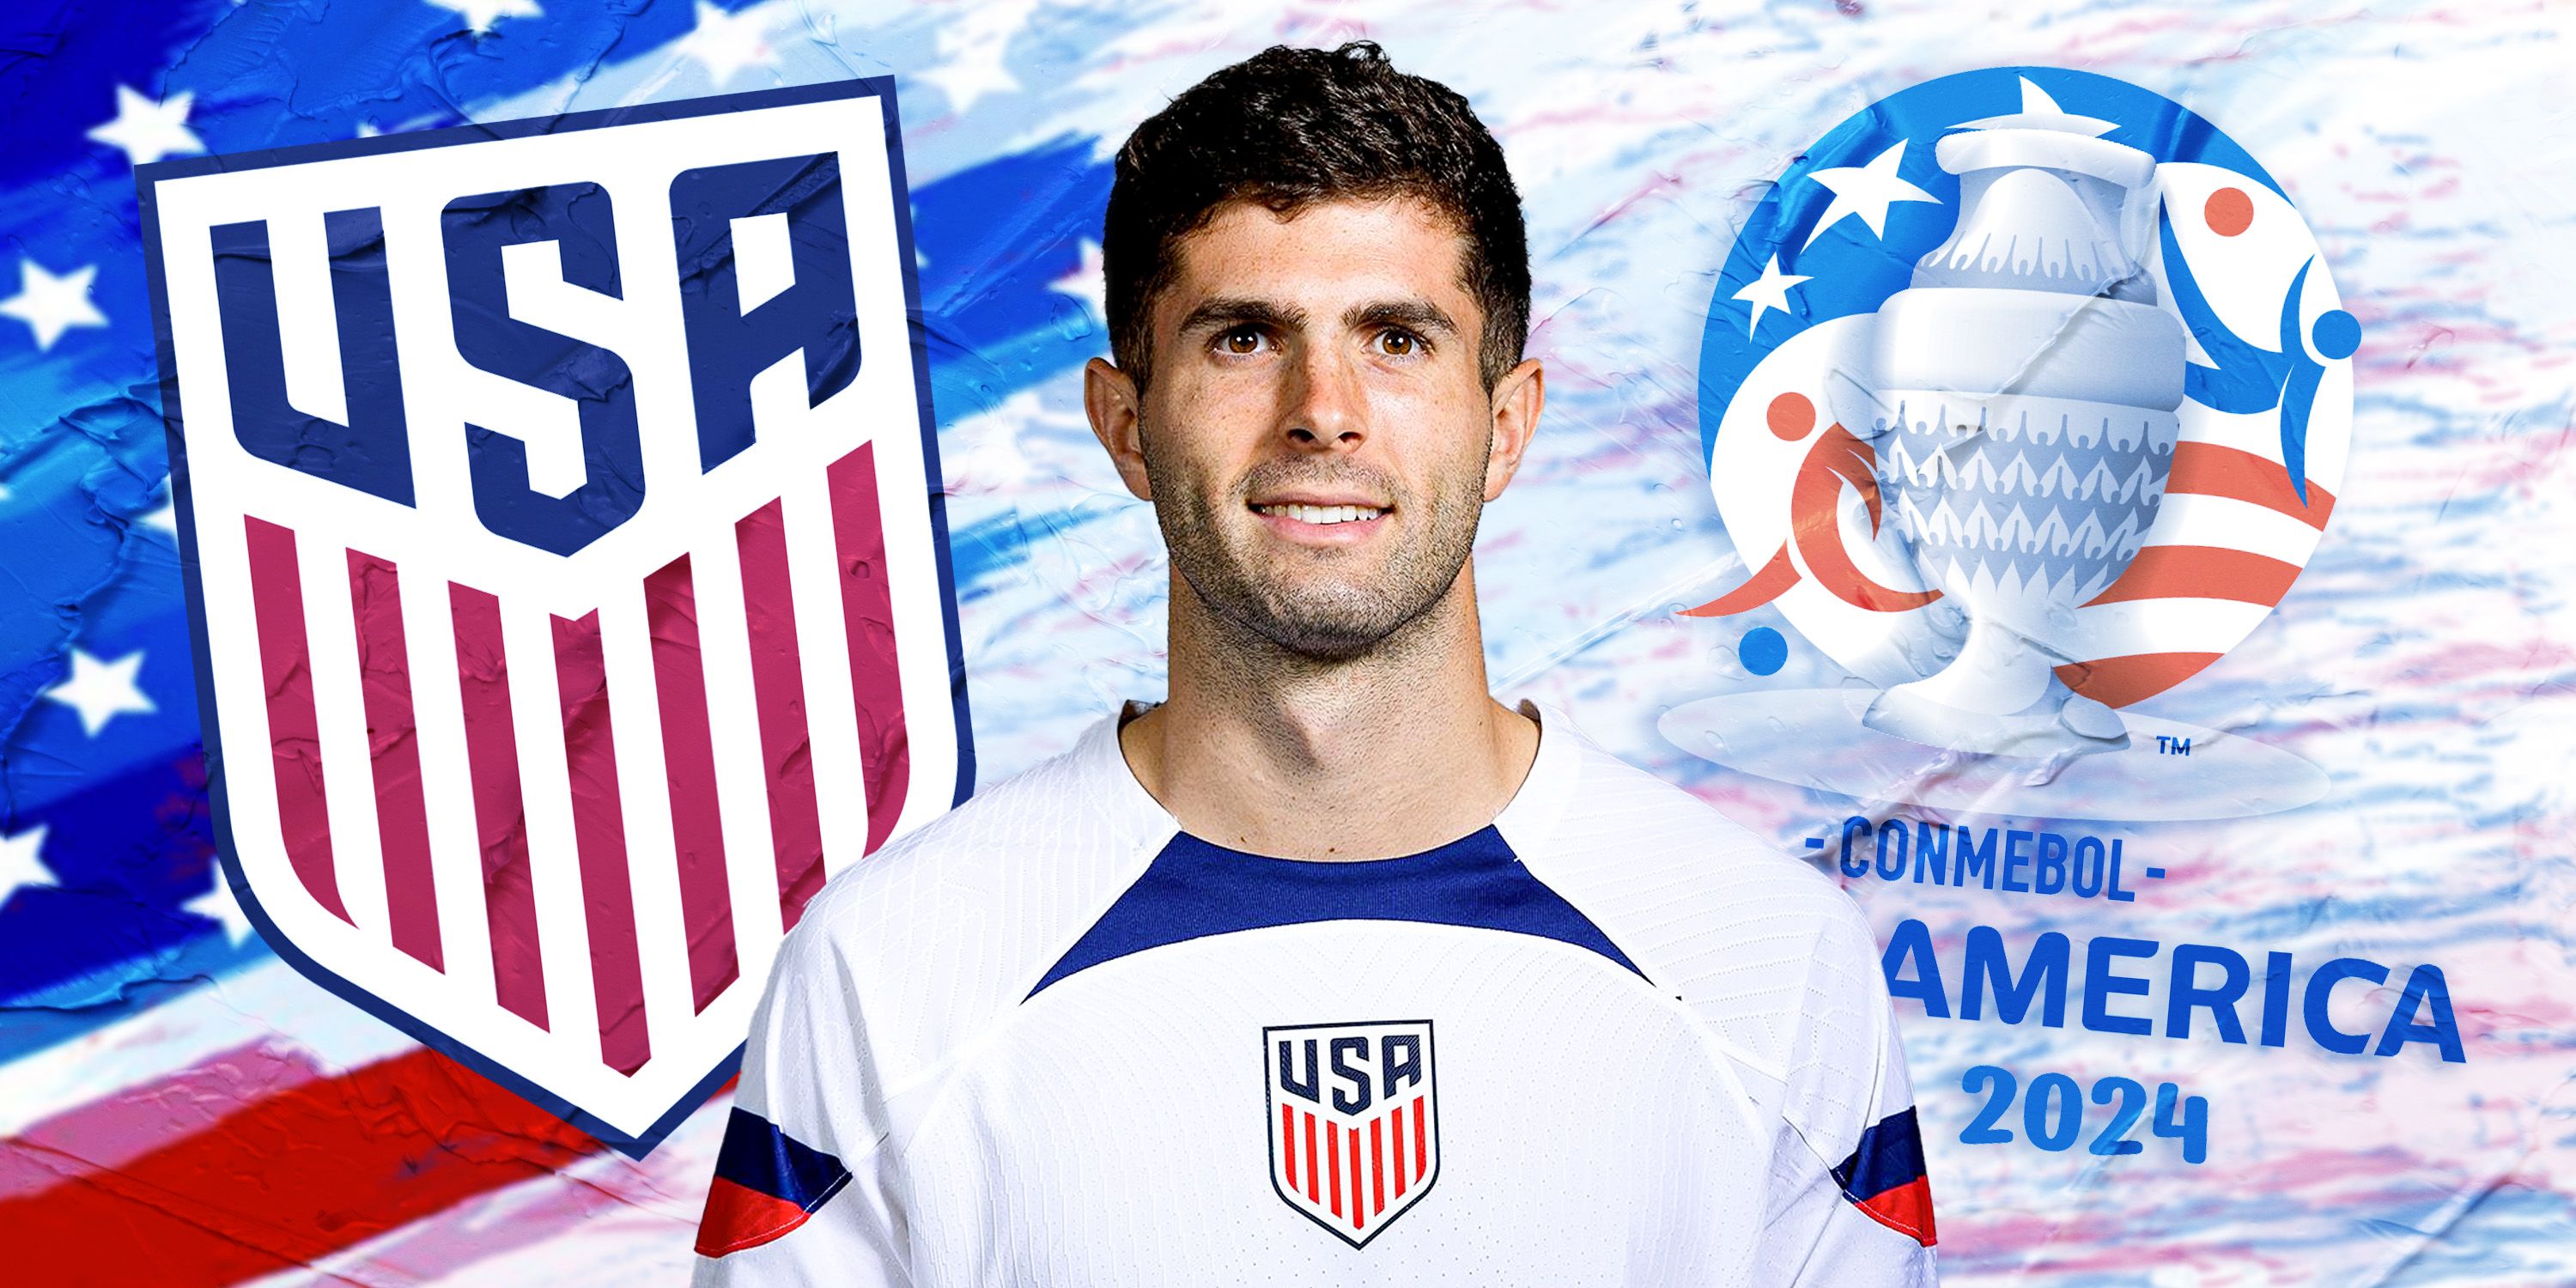 USA's road to the Copa America final featuring Christian Pulisic